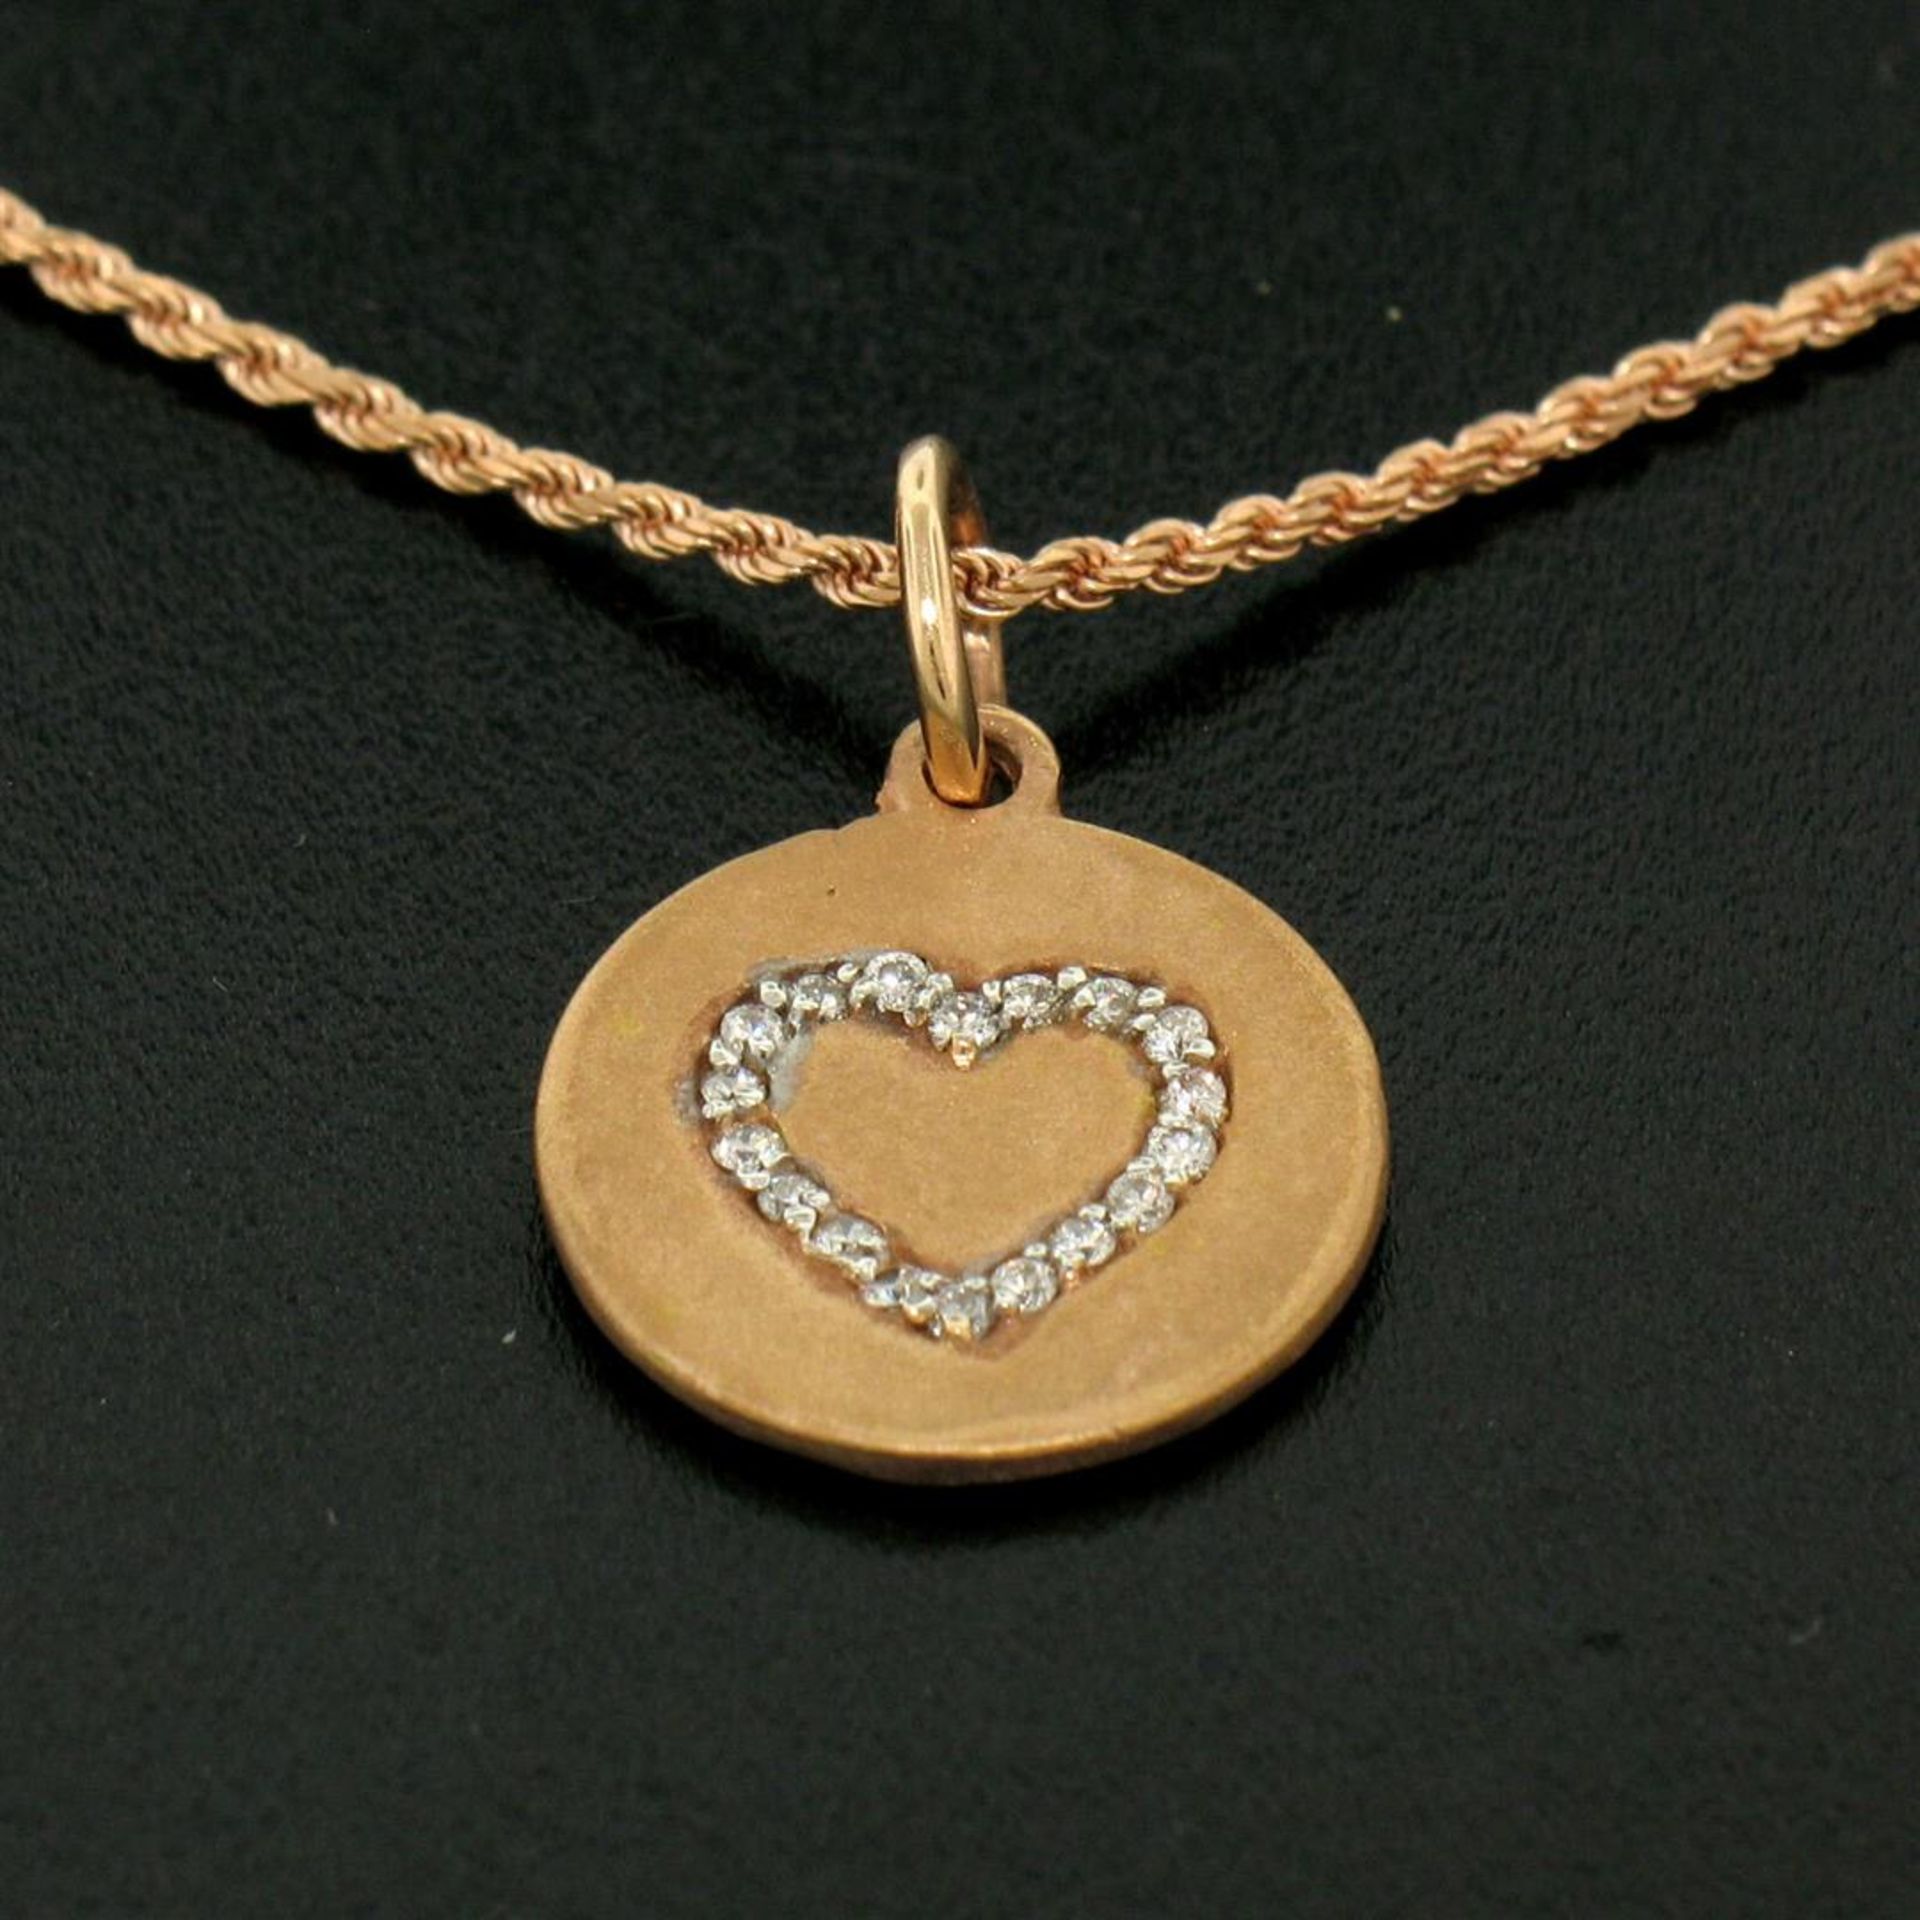 14K Rose Gold 0.13 ctw Diamond Open Heart Disc Pendant w/ 16" Rope Chain - Image 2 of 5